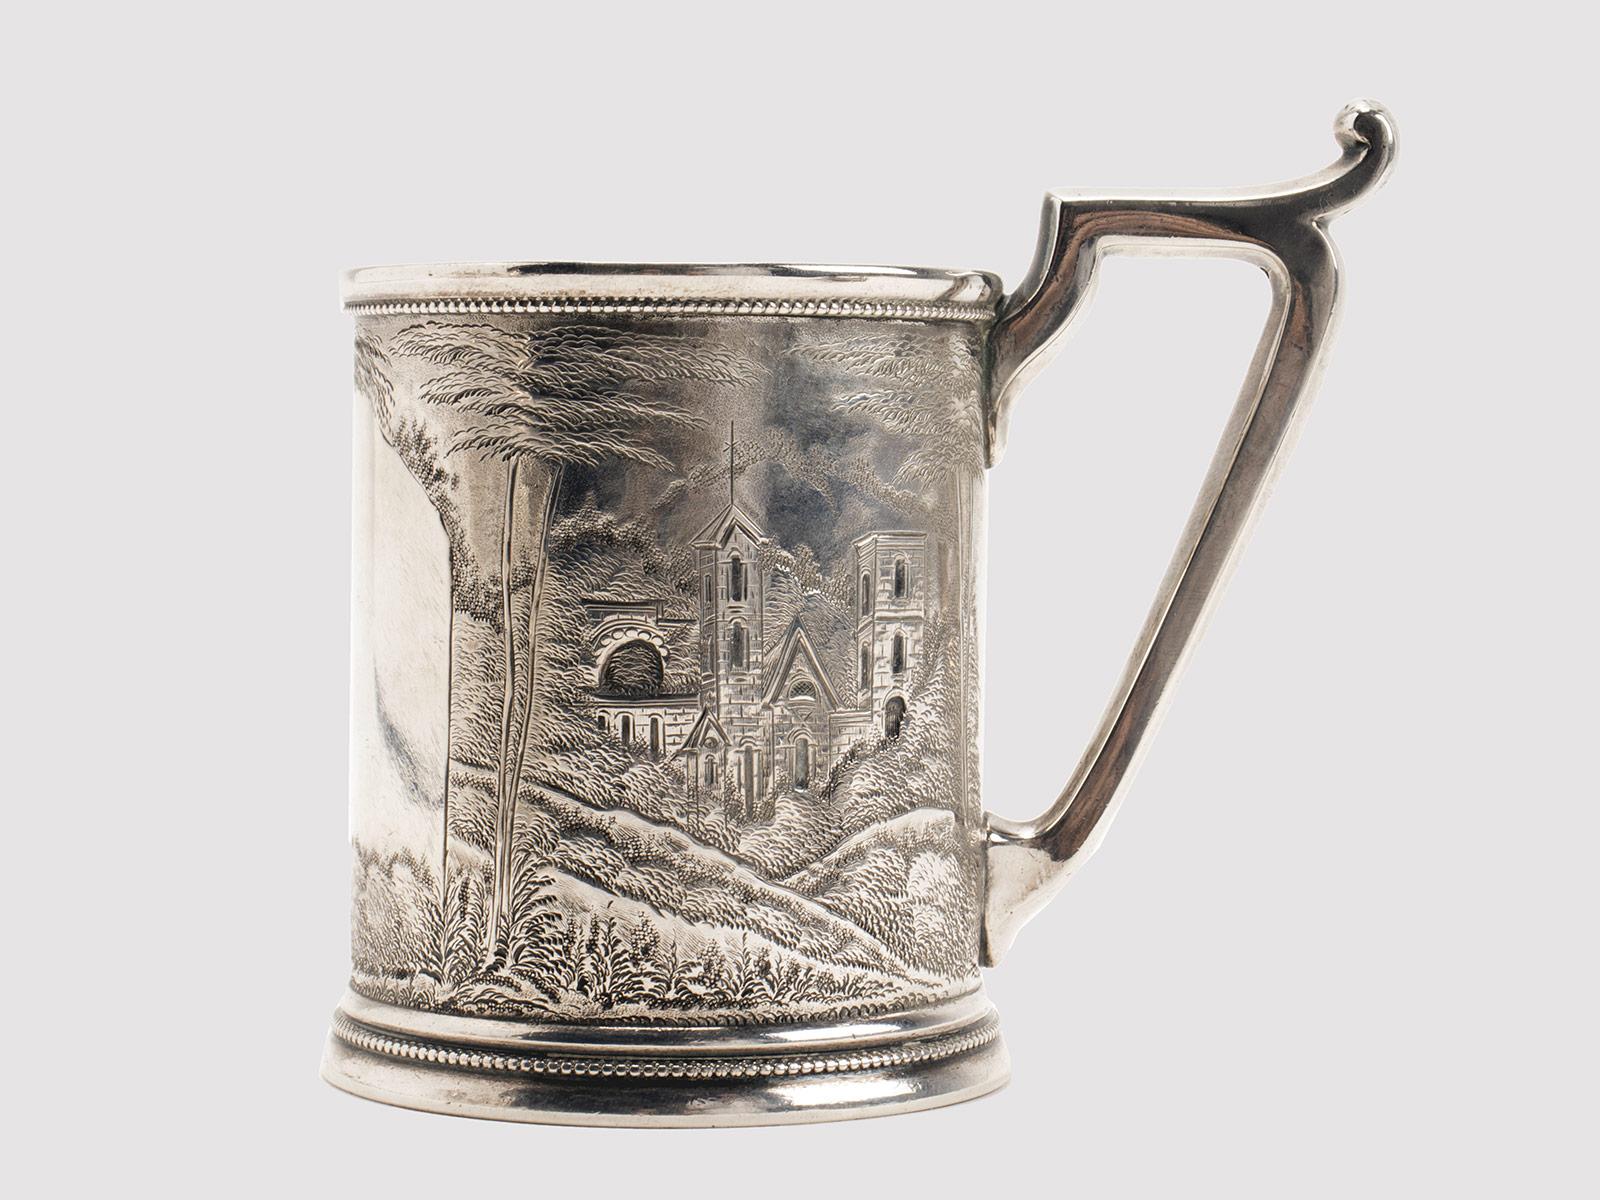 Sterling silver 925/1000 mug, lost wax worked and engraved, depicting the architecture of a village. C.G. Halberg, Stockholm, Sweden 1910.